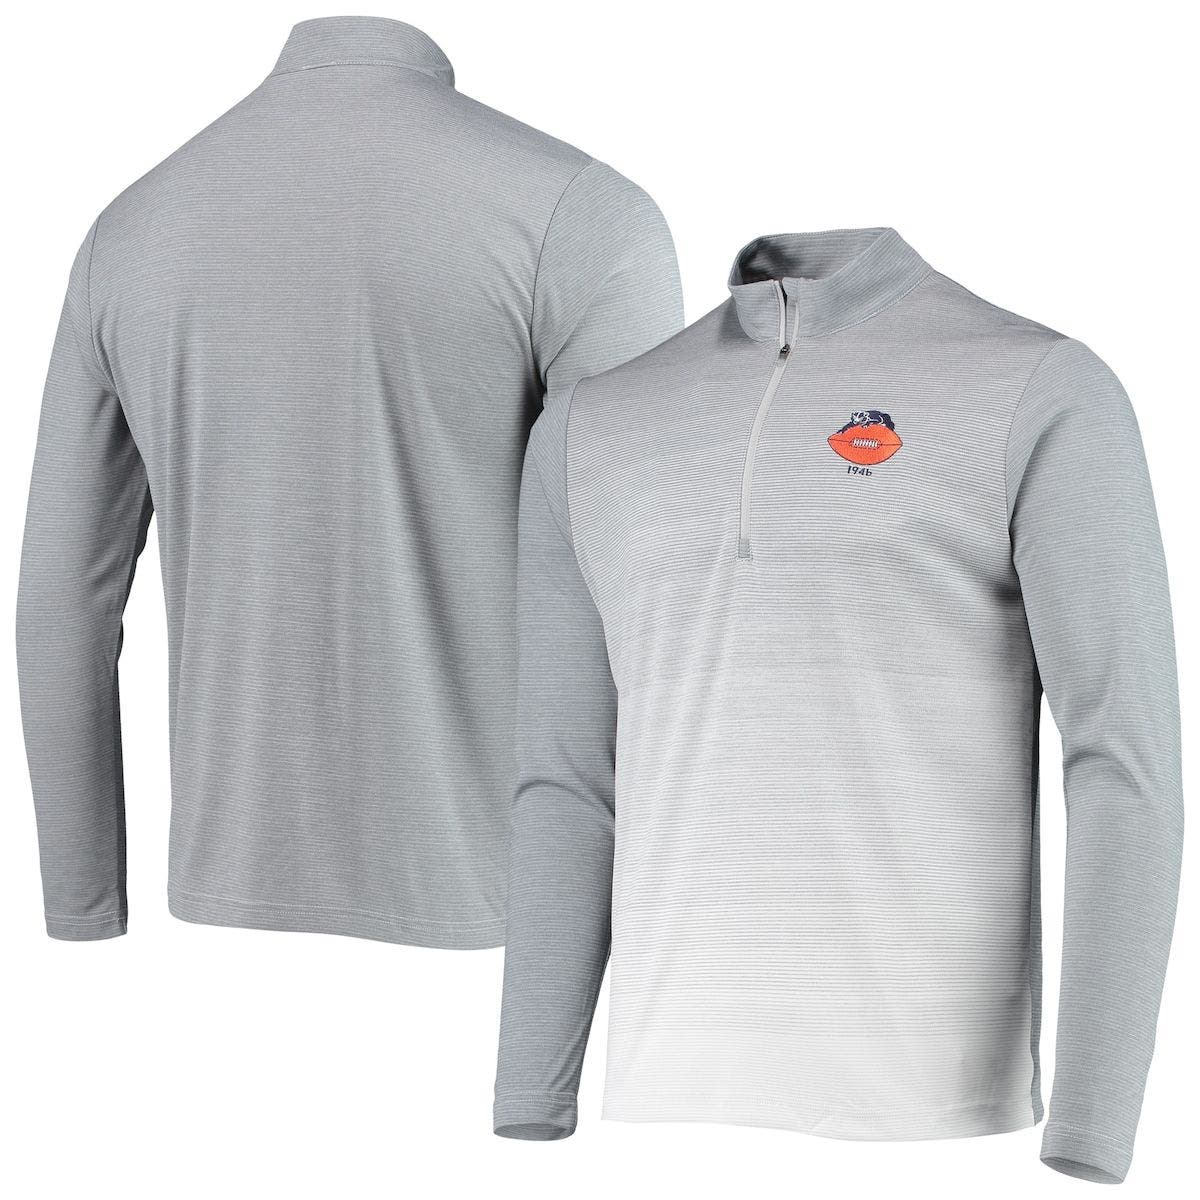 ANTIGUA Men's Antigua Heathered Gray/White Chicago Bears Throwback Cycle Quarter-Zip Jacket in Heather Gray at Nordstrom